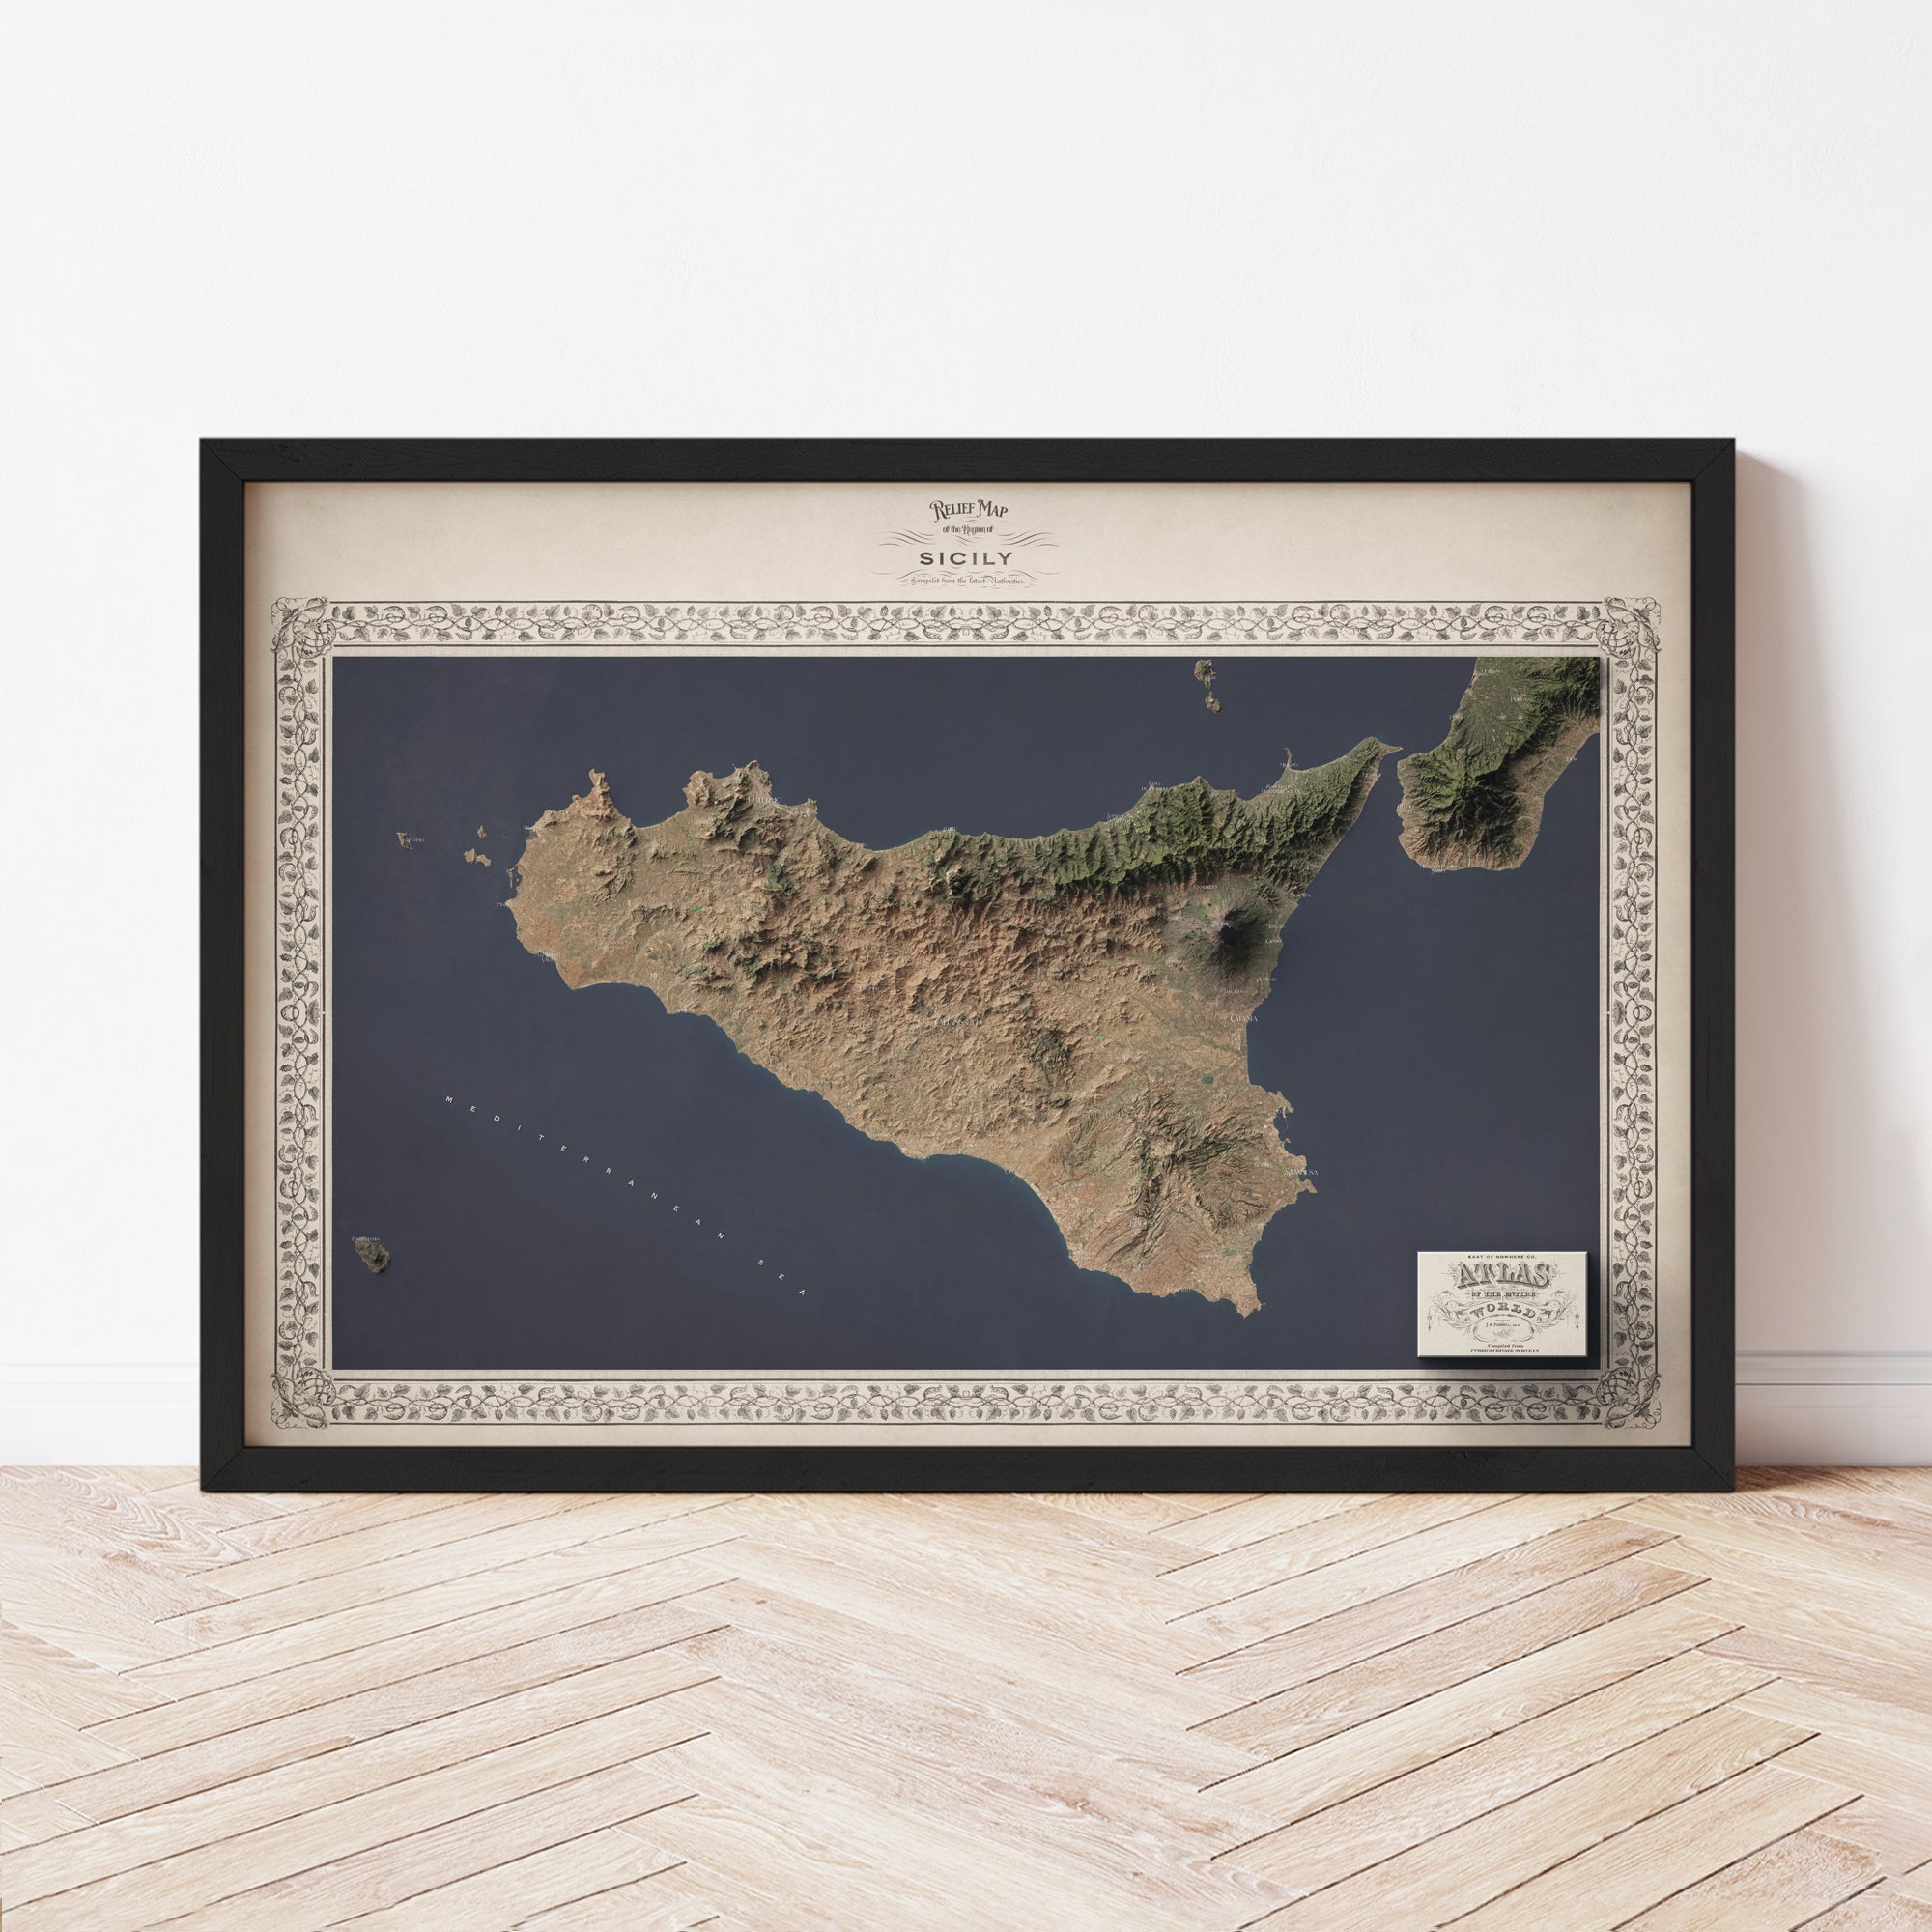 Sicily Map - The East of Nowhere World Atlas